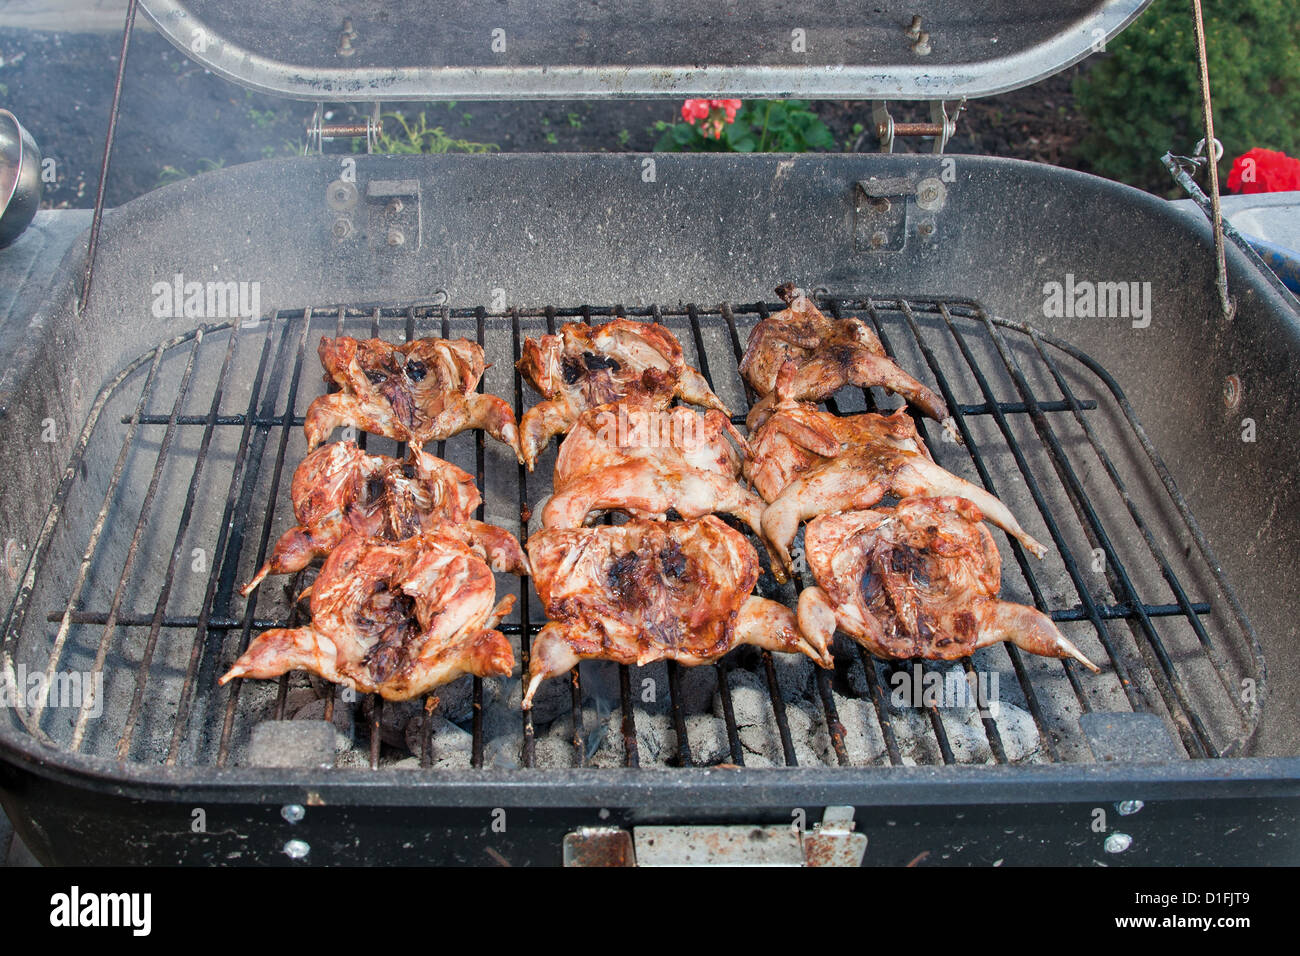 BBQ quails cooking on a grill in the garden Stock Photo